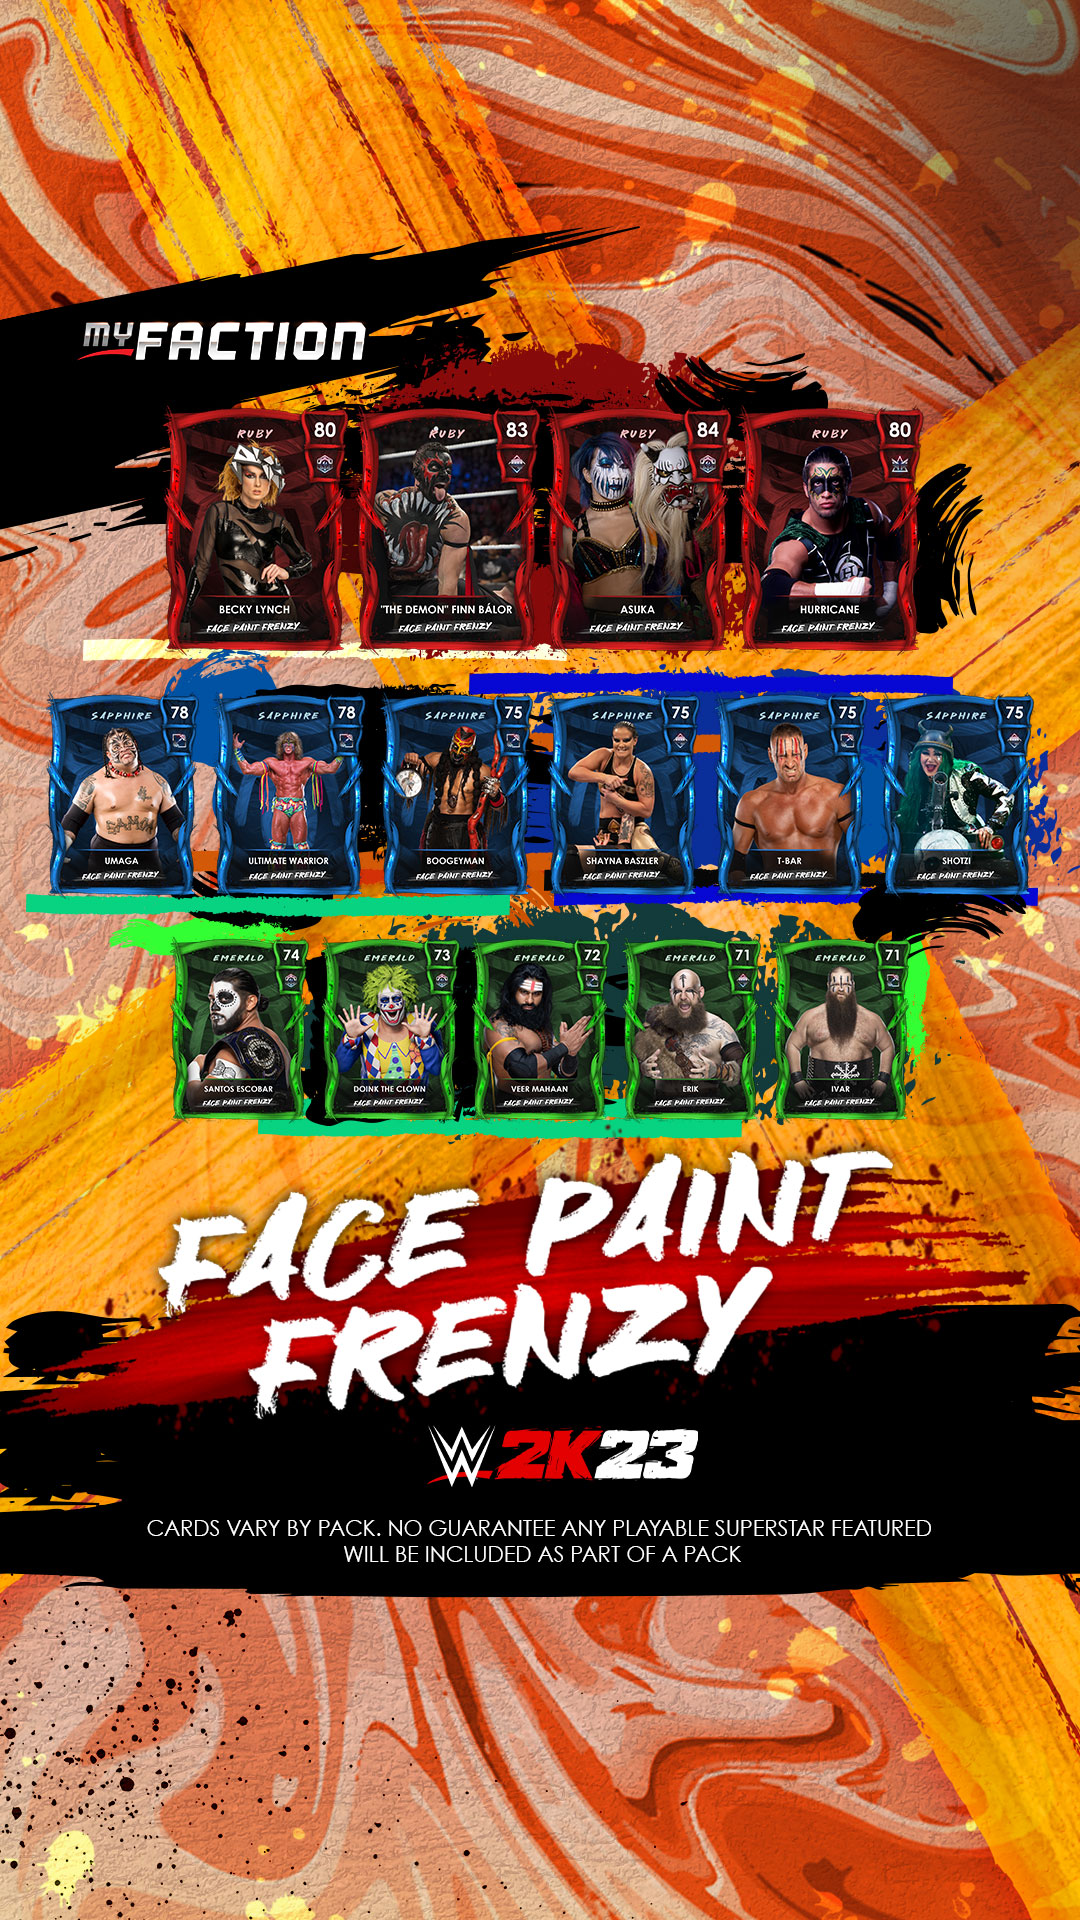 W2K23-FACE PAINT FRENZY-PACK-1080X1920 (1)